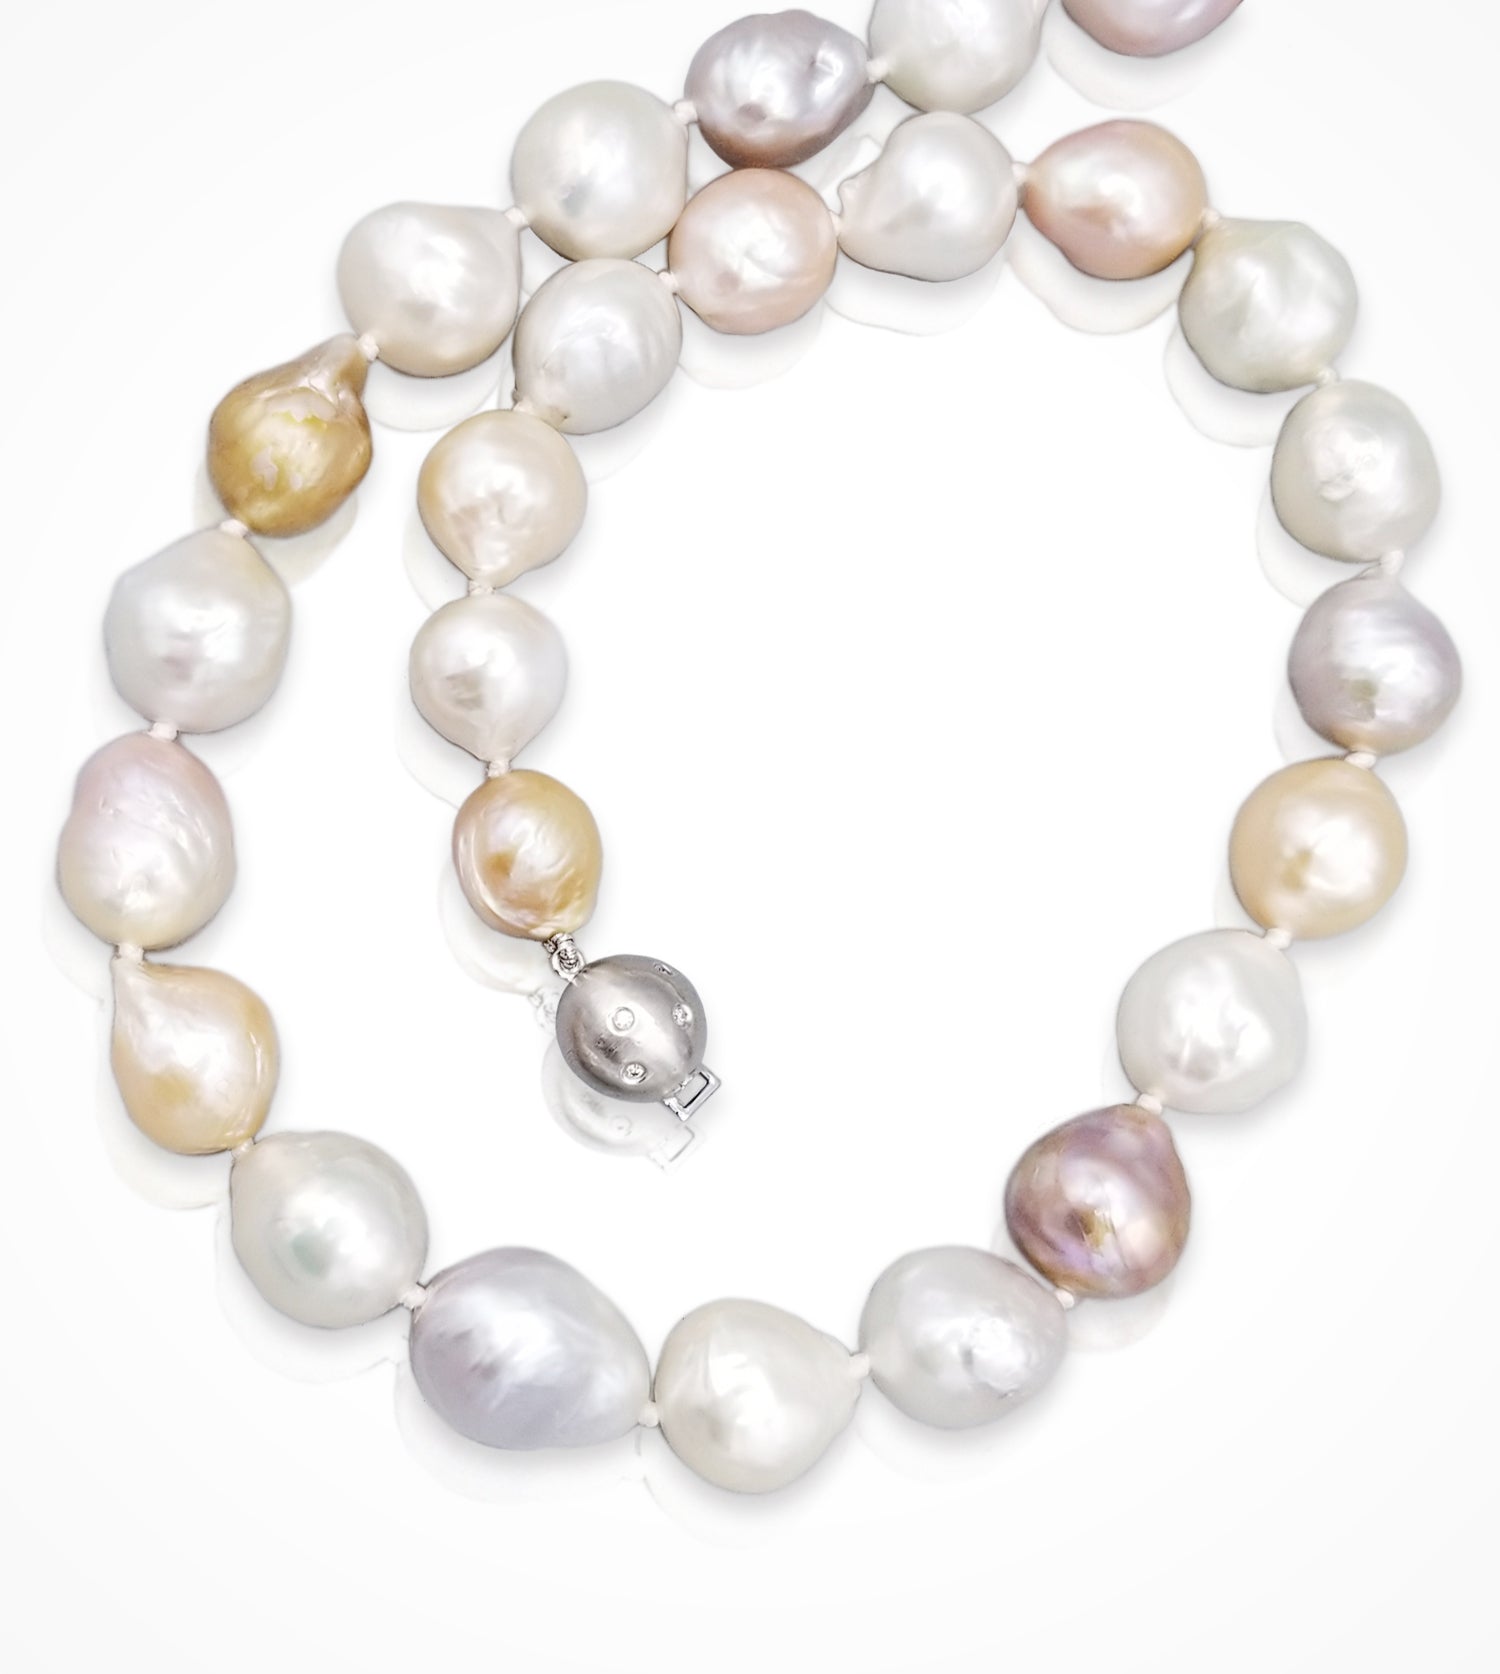 NE-002608 18-14K White gold clasp and 31 Kasumiga pearl necklace,10.5-13mm, 17.5 inches long.